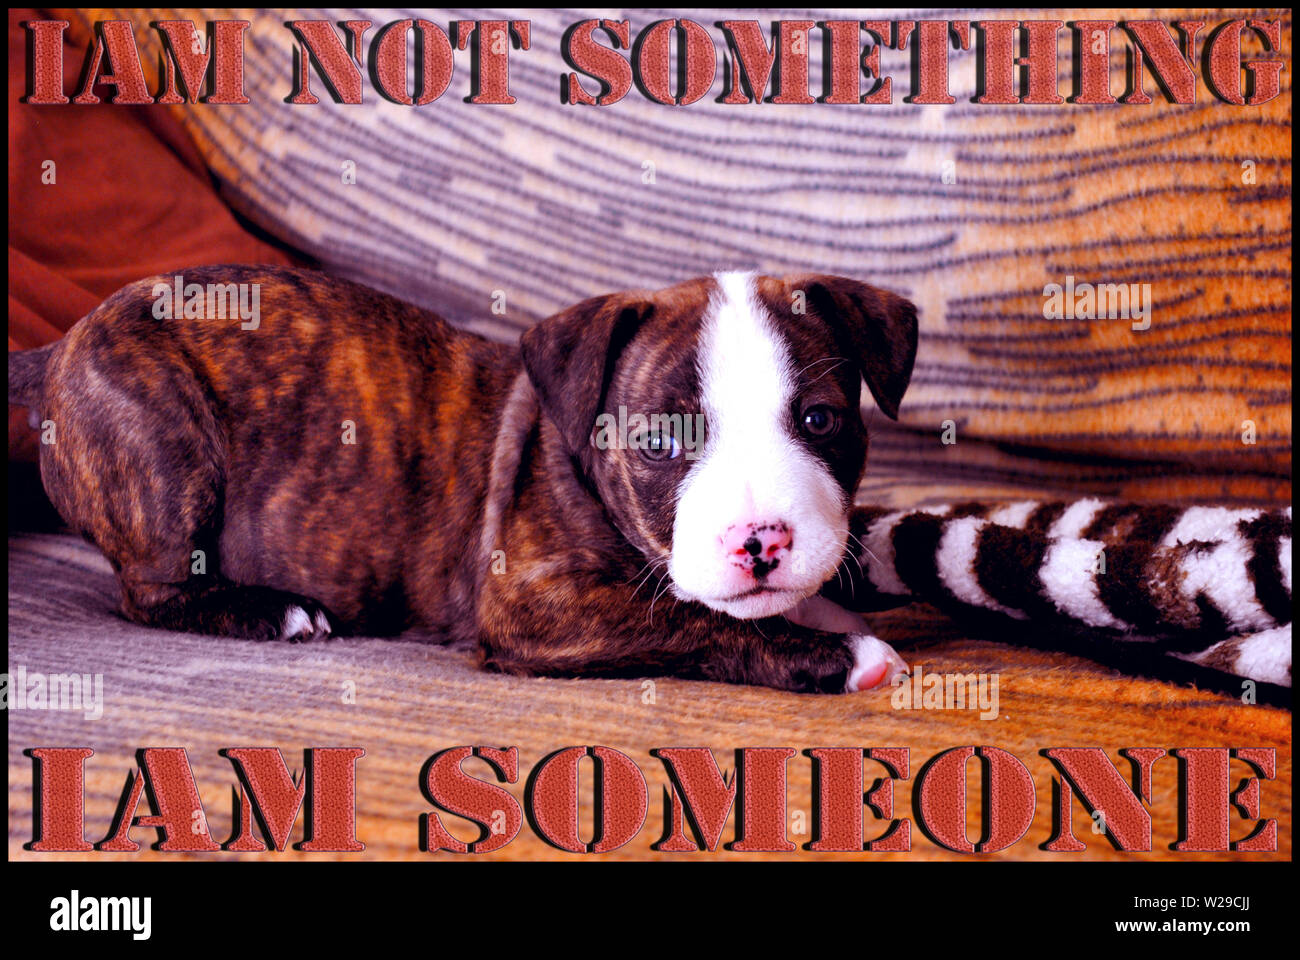 Dogs quotes quotes background fine art in high quality prints products Stock Photo